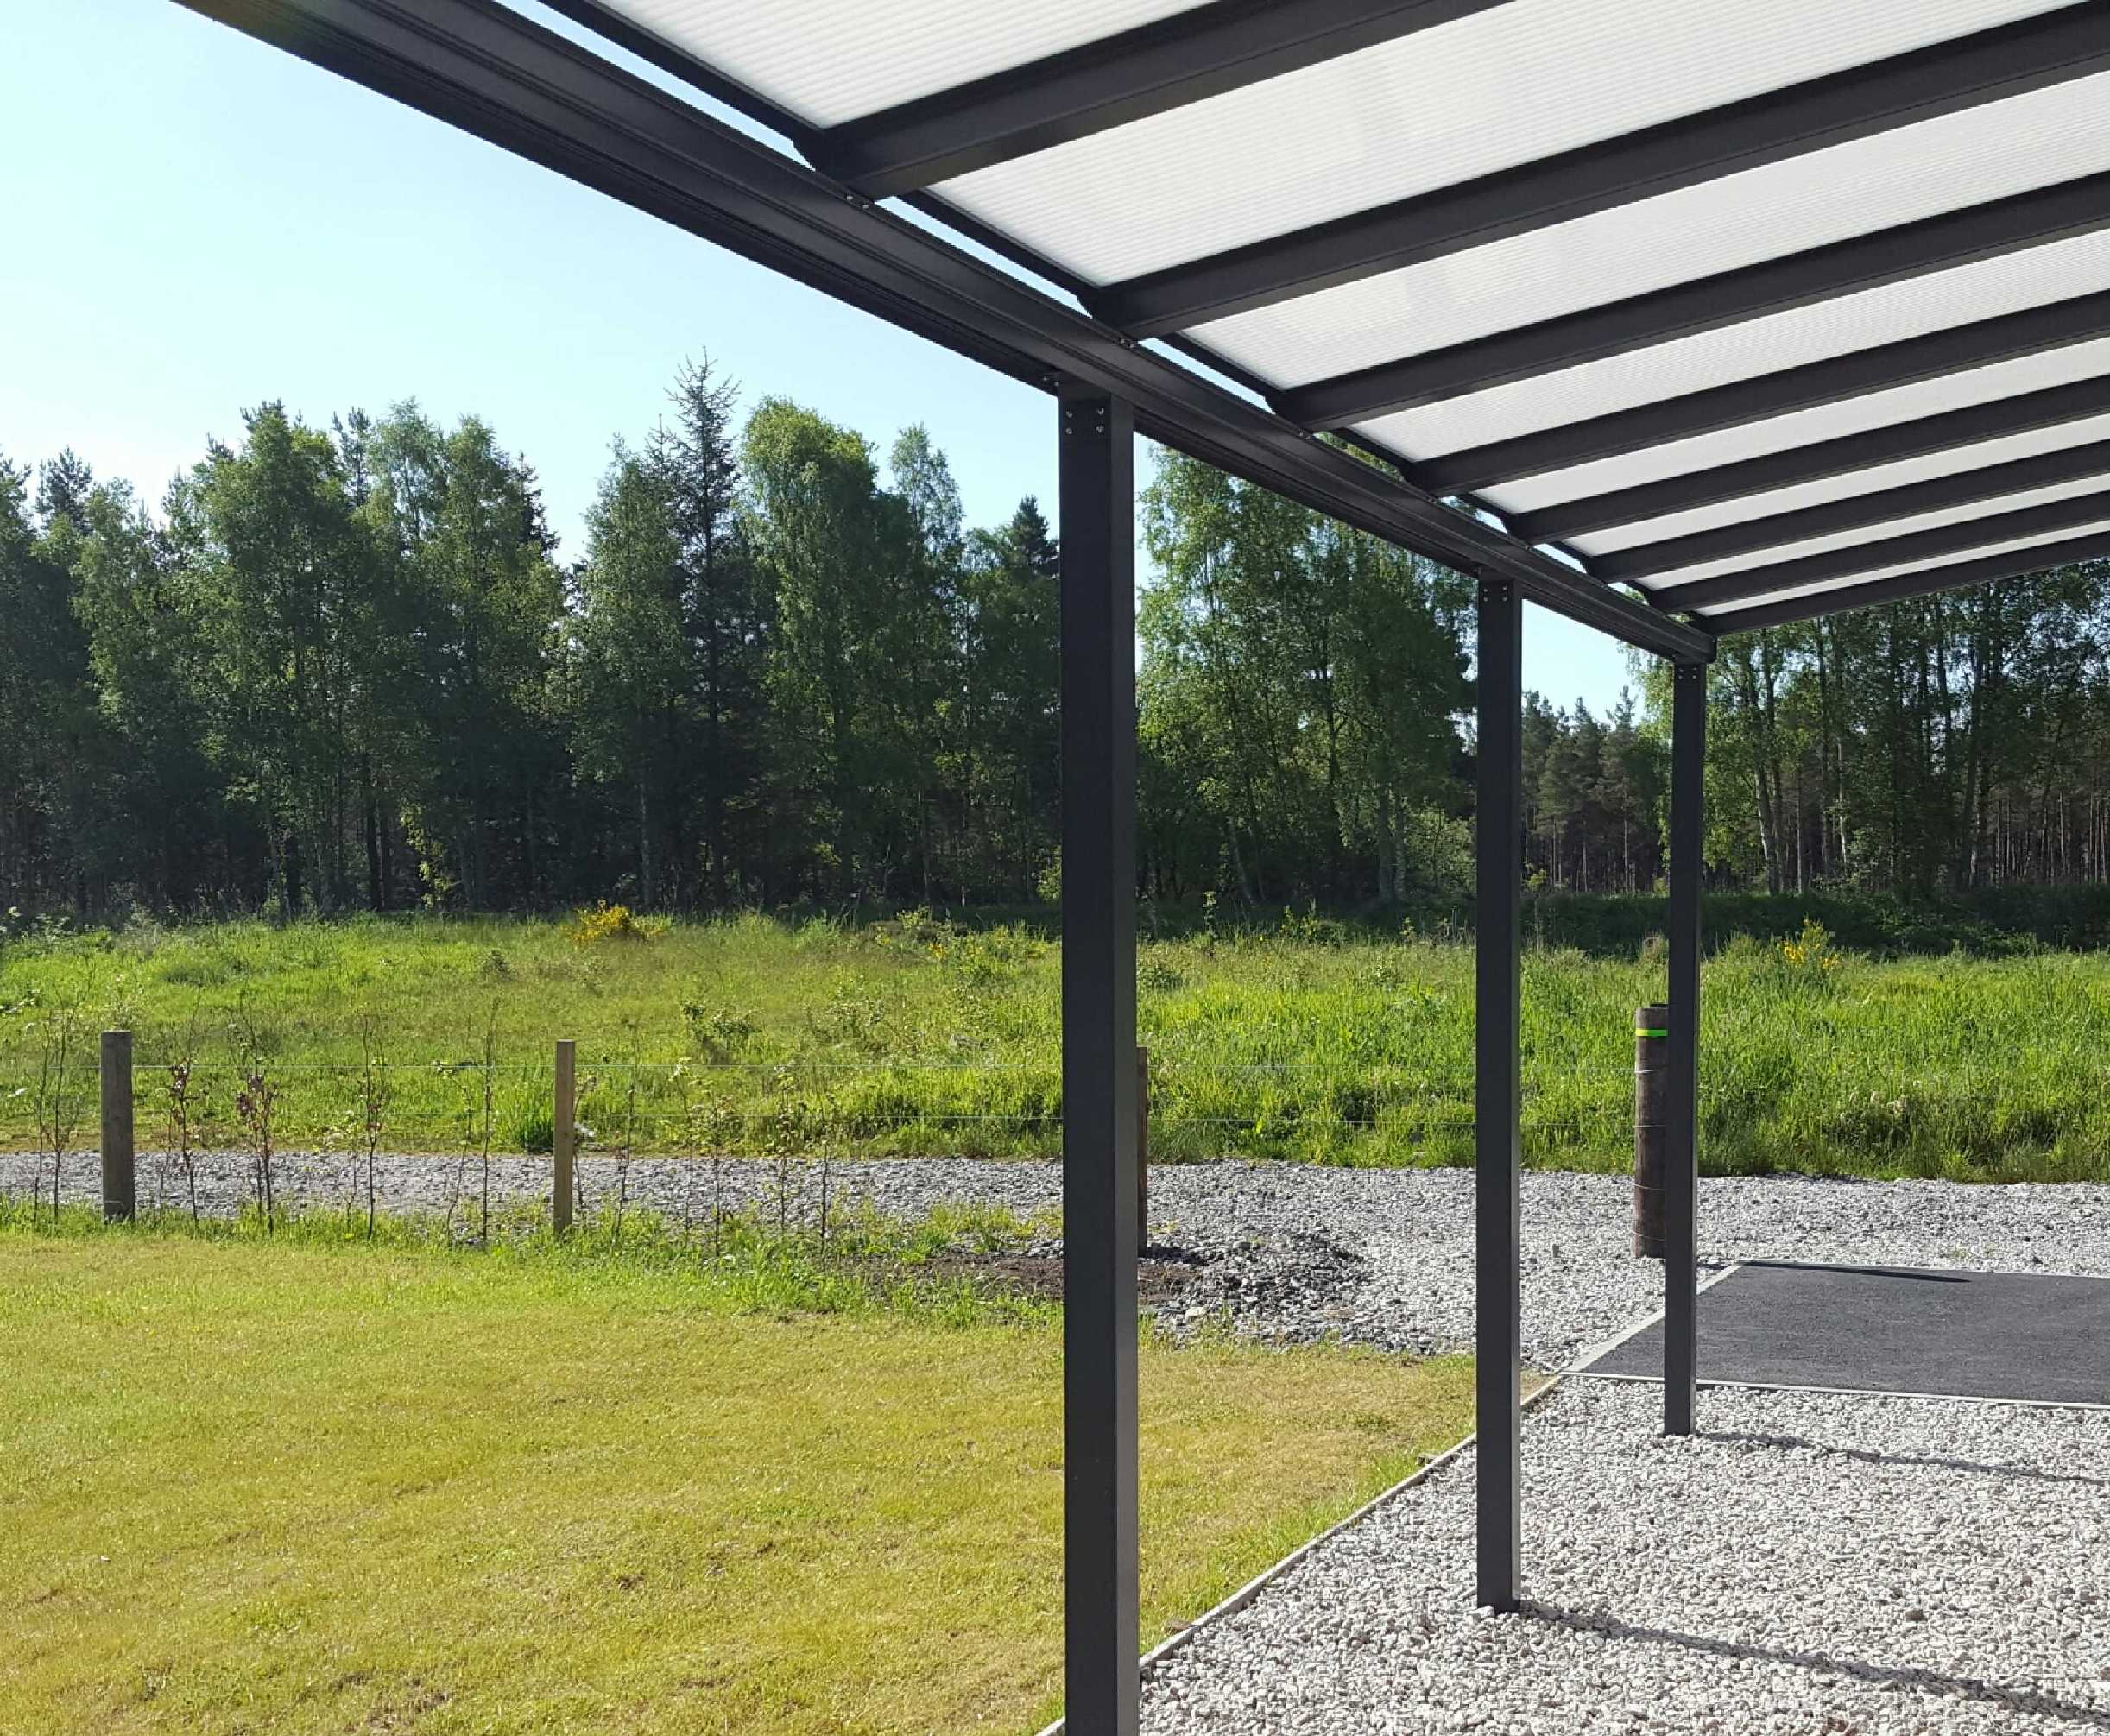 Omega Smart Lean-To Canopy, Anthracite Grey, 6mm Glass Clear Plate Polycarbonate Glazing - 5.6m (W) x 1.5m (P), (3) Supporting Posts